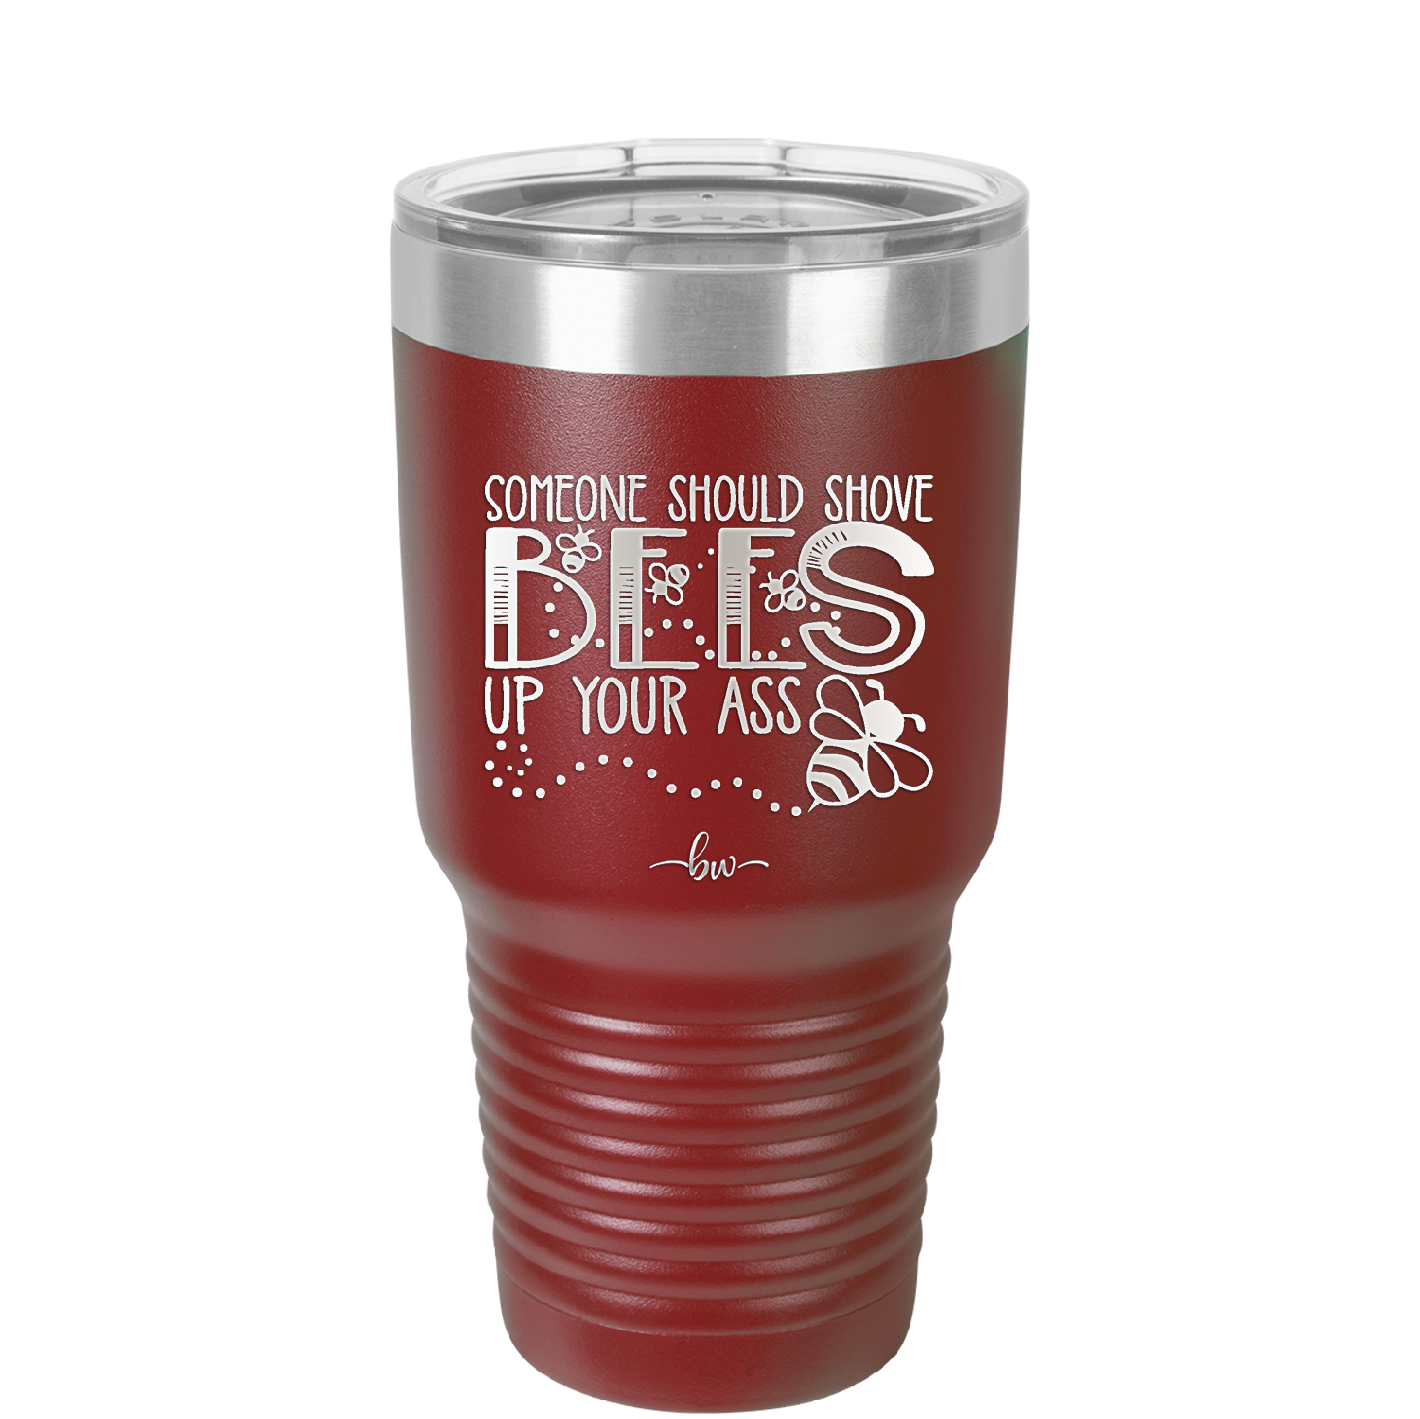 Someone Should Shove Bees Up Your Ass - Laser Engraved Stainless Steel Drinkware - 1372 -